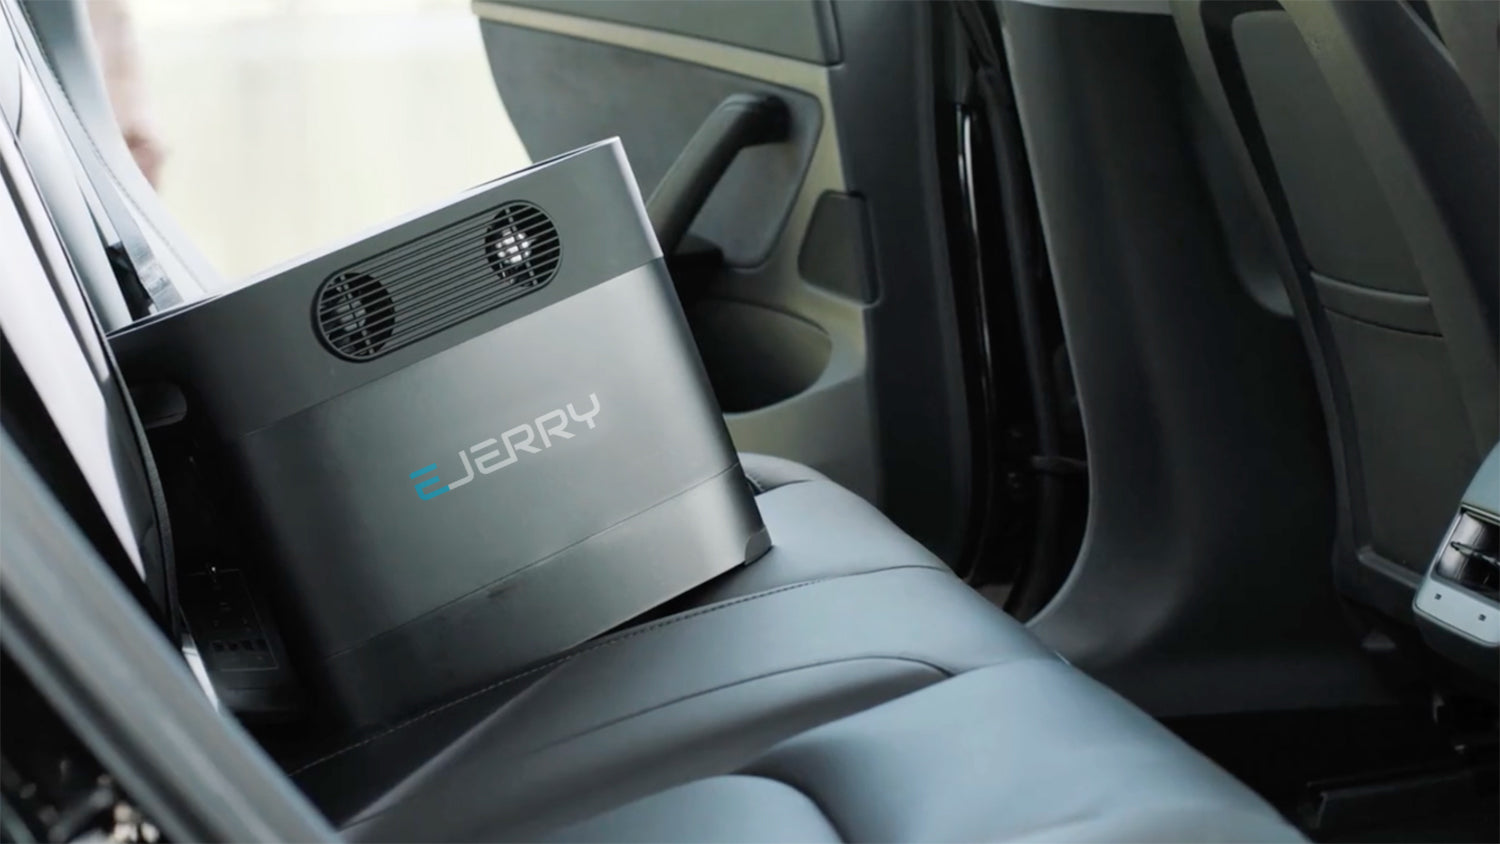 EJERRY EV Charger on car seat 